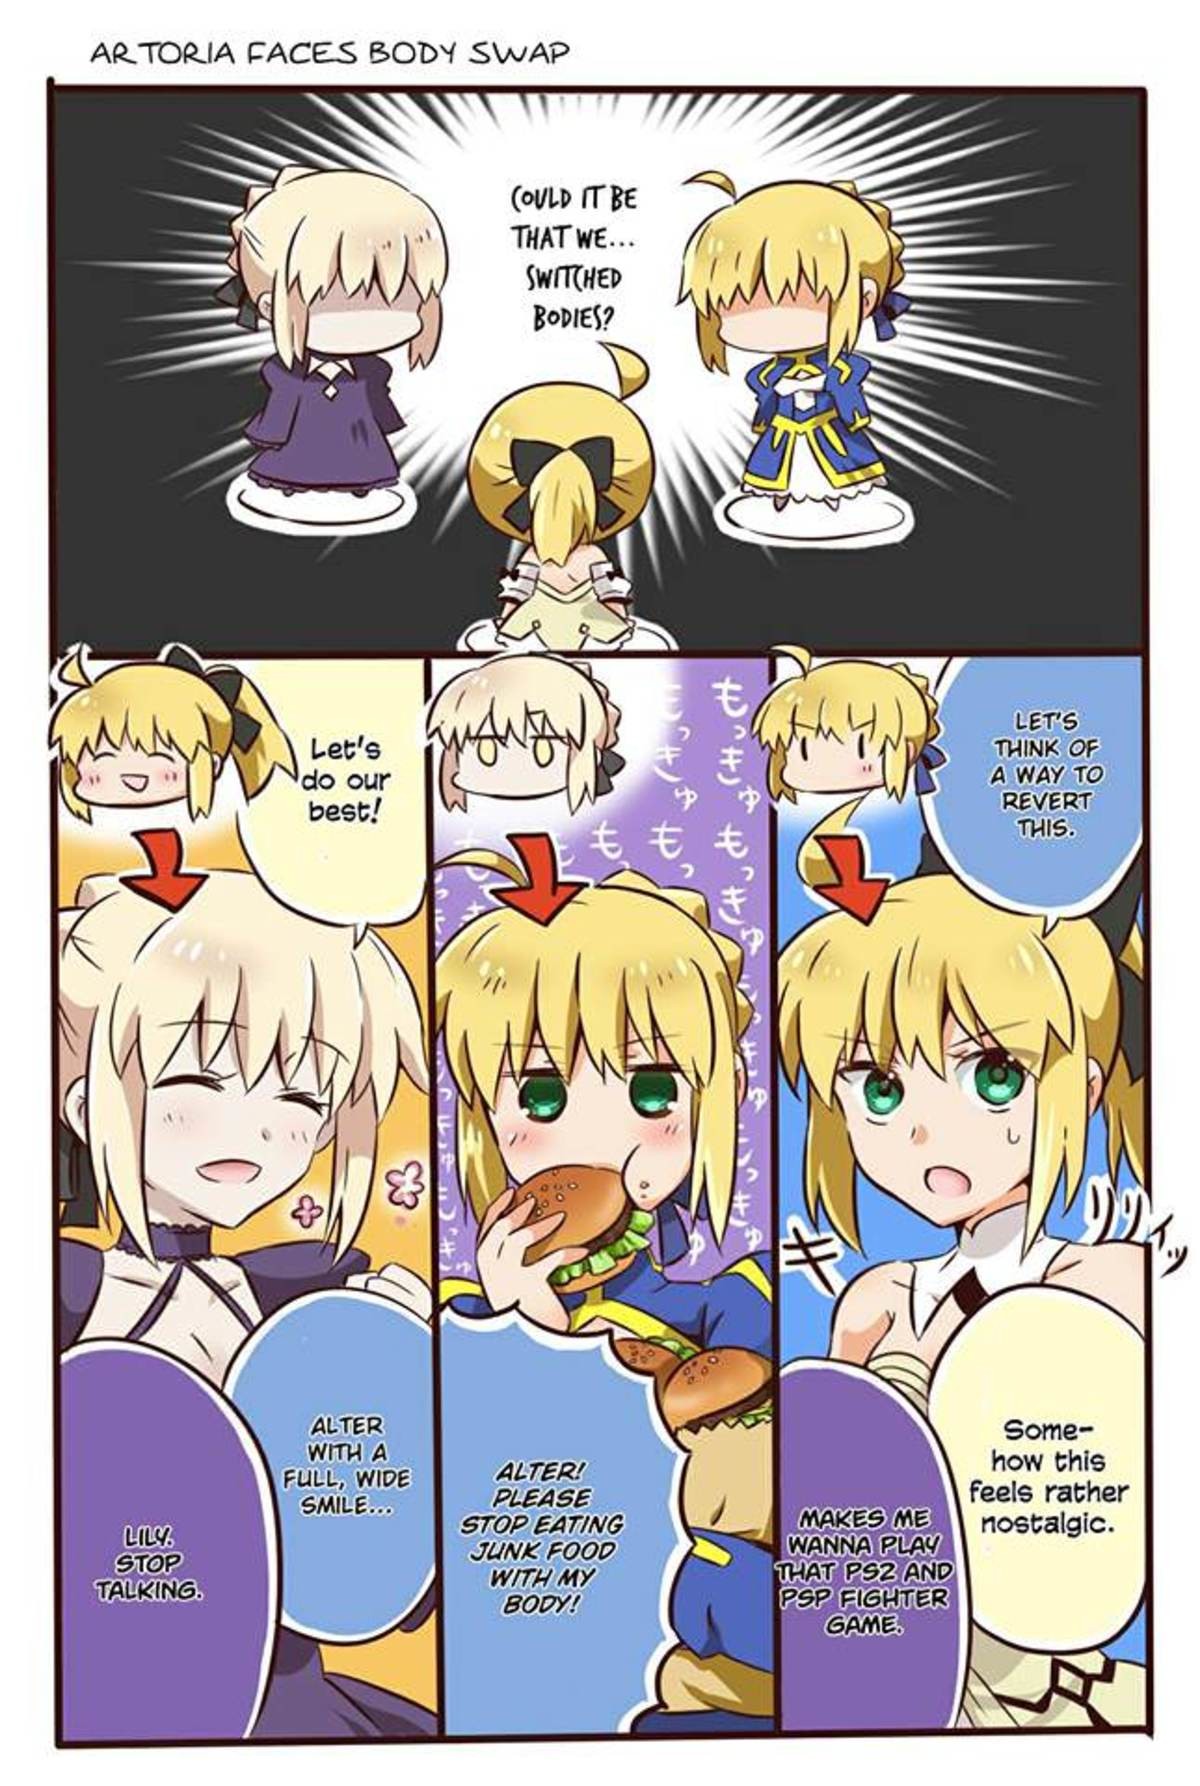 Artoria Body Swap. Source bodyswap/ join list: Fate (425 subs)Mention History join list:. They are still cute together.